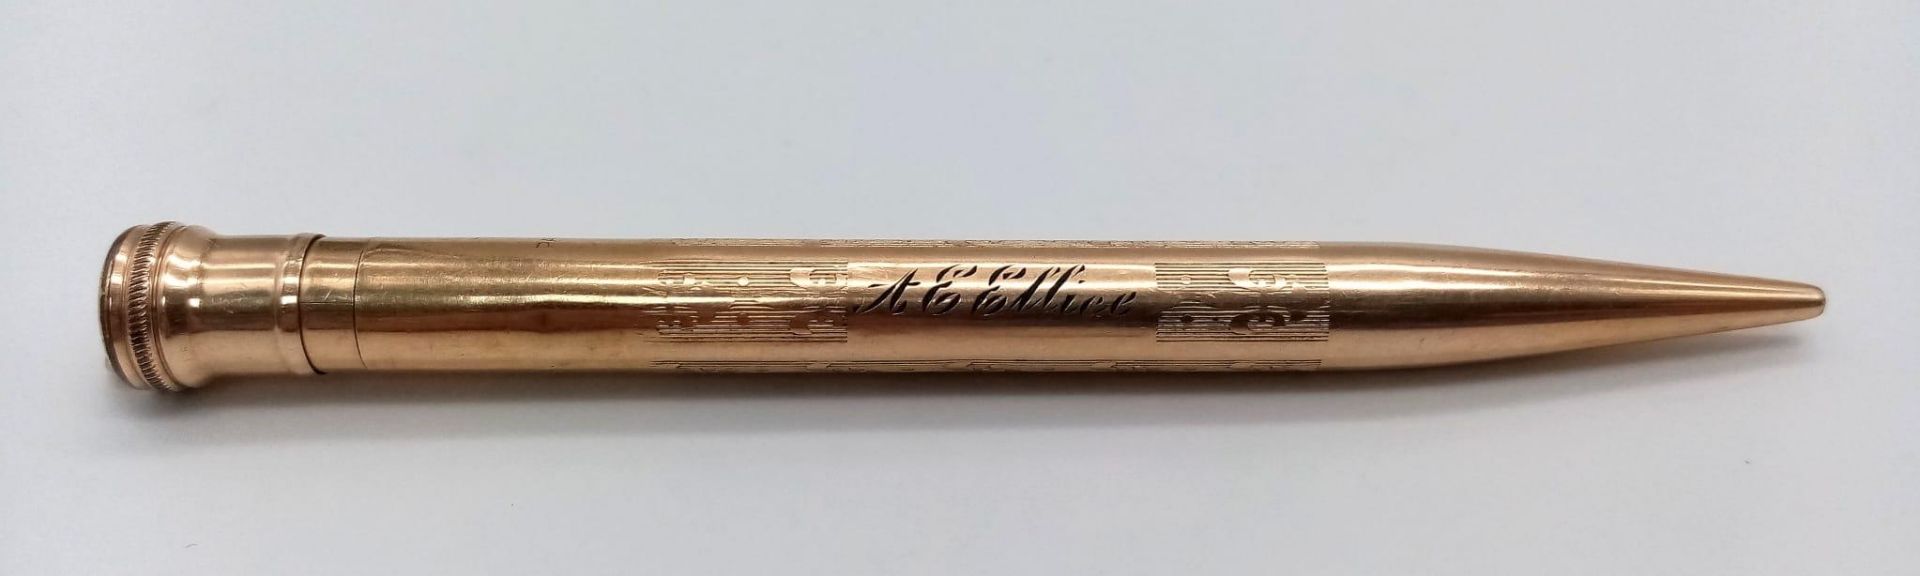 A vintage Redipoint Rolled gold pen. Beautiful engraved design, measures 11cm and weighs 15.10 grams - Image 2 of 5